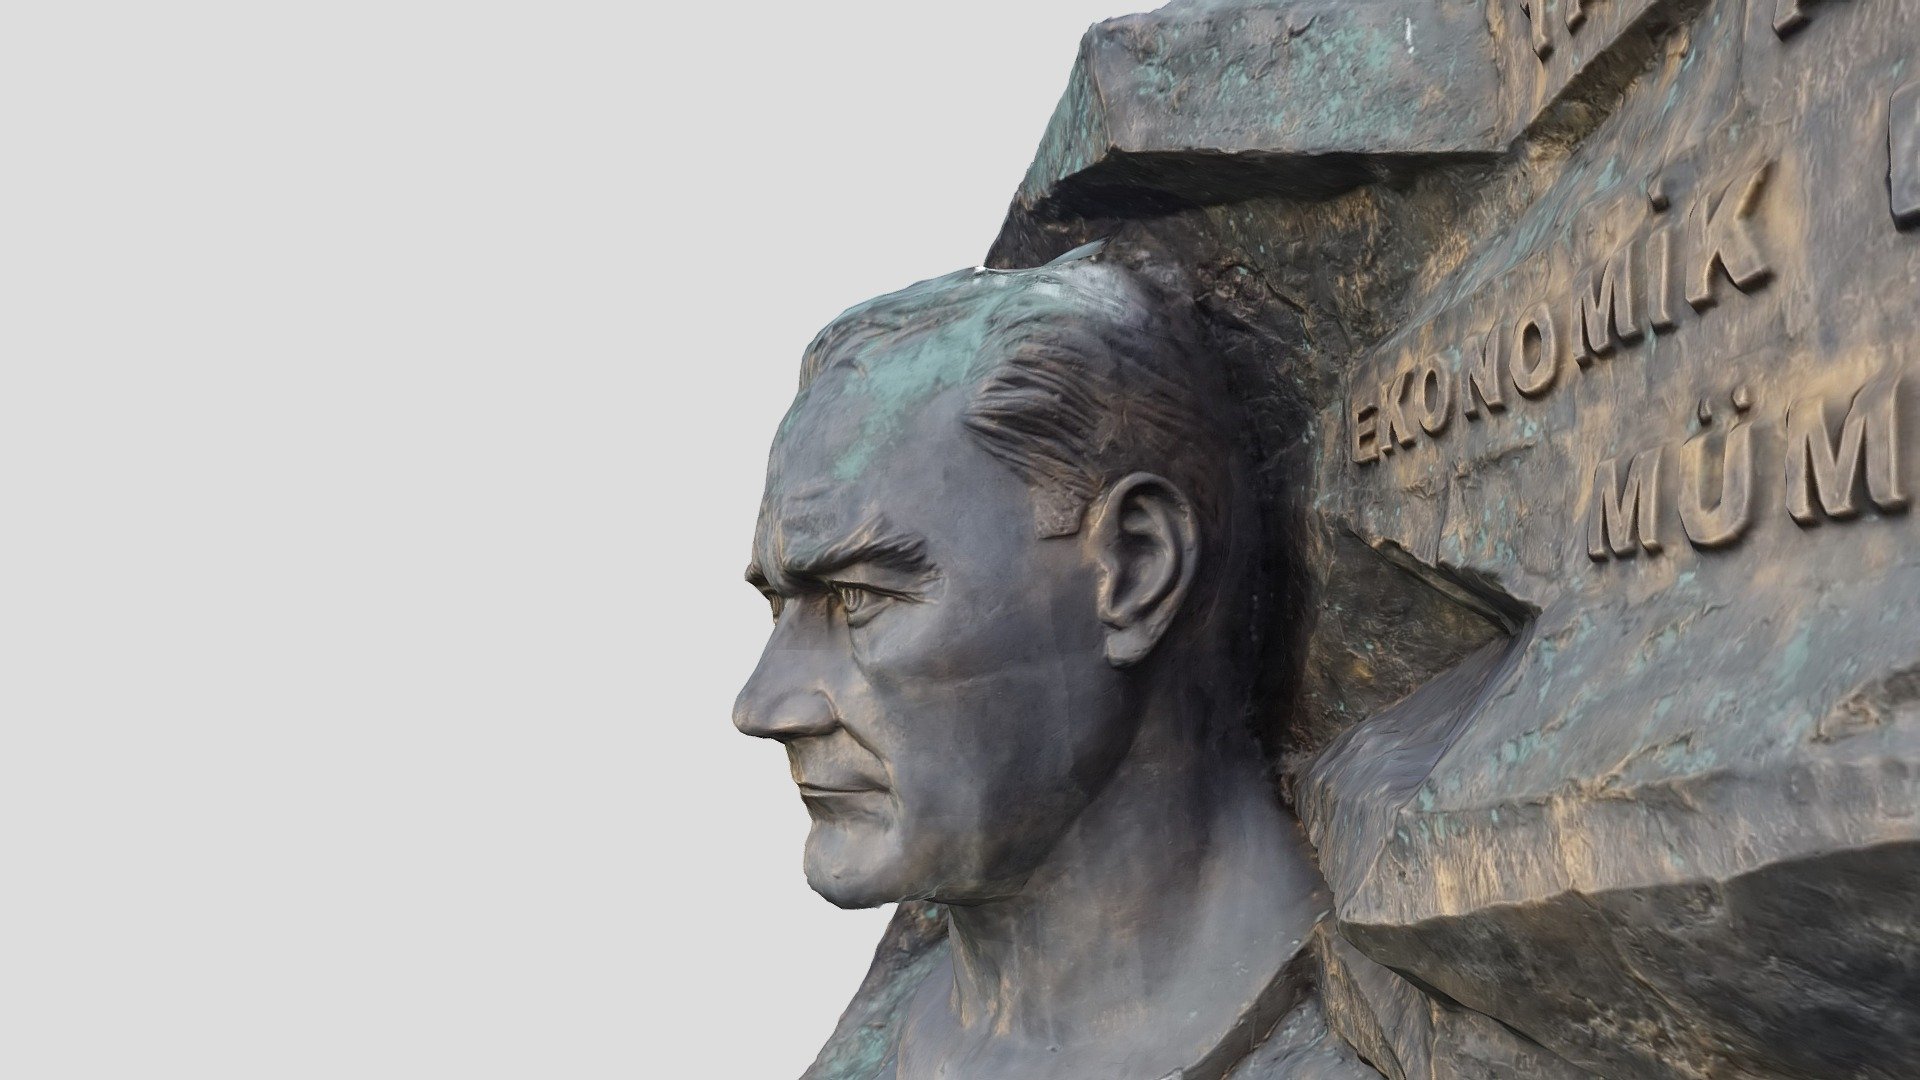 Atatürk Statue was made by sculptor Tankut Öktem in 2004.

Photogrammetric 3d model was produced using 490 photos (SONY ILCE-6000).

In the work, there is the following statement of Atatürk in 1922.
&ldquo;Full independence is only possible with economic independence.